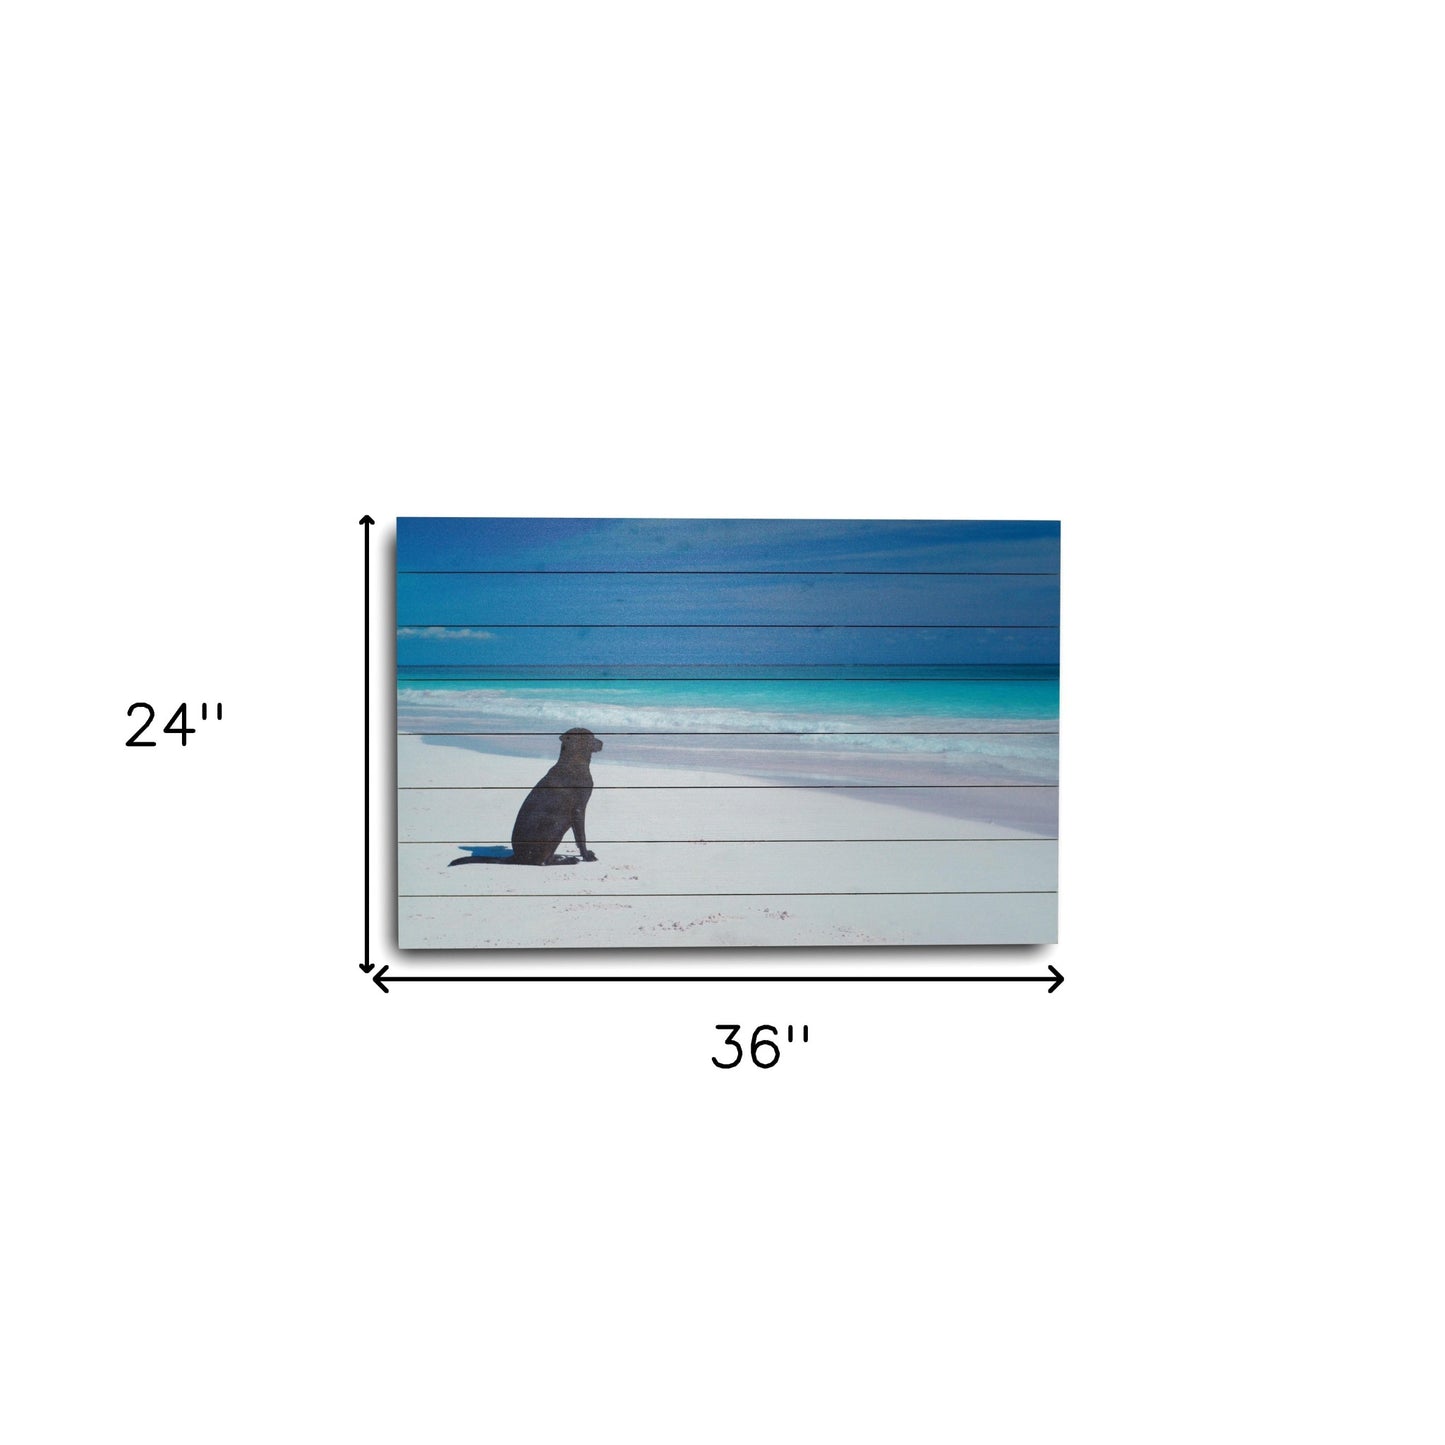 36" Energetic Dog at the Beach Unframed Photograph Wall Art